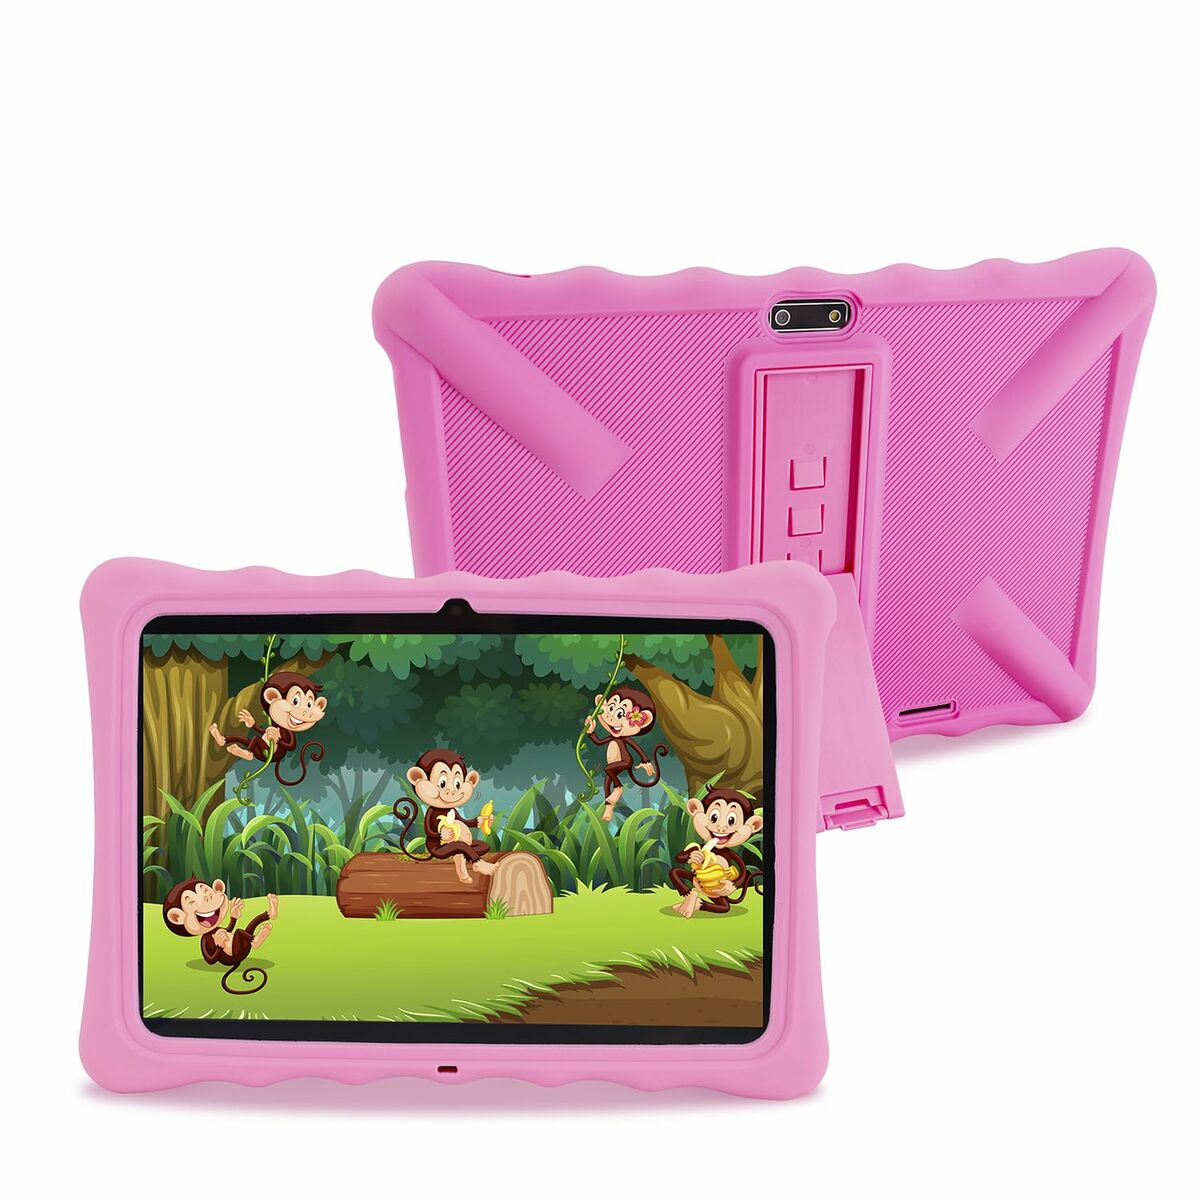 Interactive Tablet for Children A7 Pink, BigBuy Tech, Toys and games, Electronic toys, interactive-tablet-for-children-a7-pink, Brand_BigBuy Tech, category-reference-2609, category-reference-2617, category-reference-2626, category-reference-t-11190, category-reference-t-11203, category-reference-t-11206, category-reference-t-19663, Condition_NEW, entertainment, para los más peques, Price_100 - 200, telephones & tablets, vuelta al cole, RiotNook